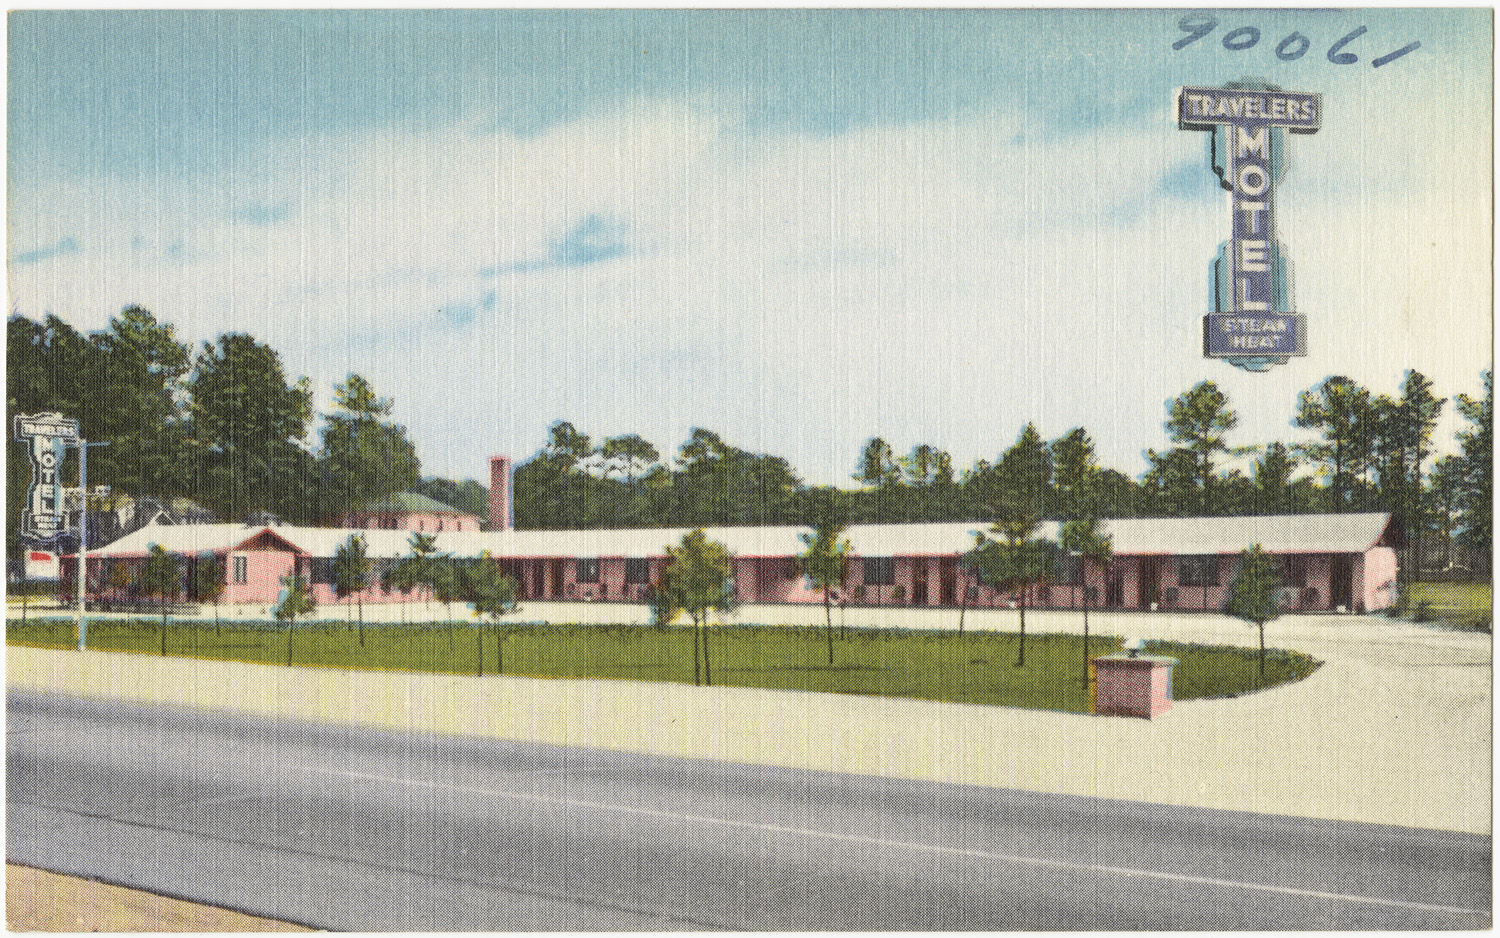 a colorful postcard of motels on the side of a street